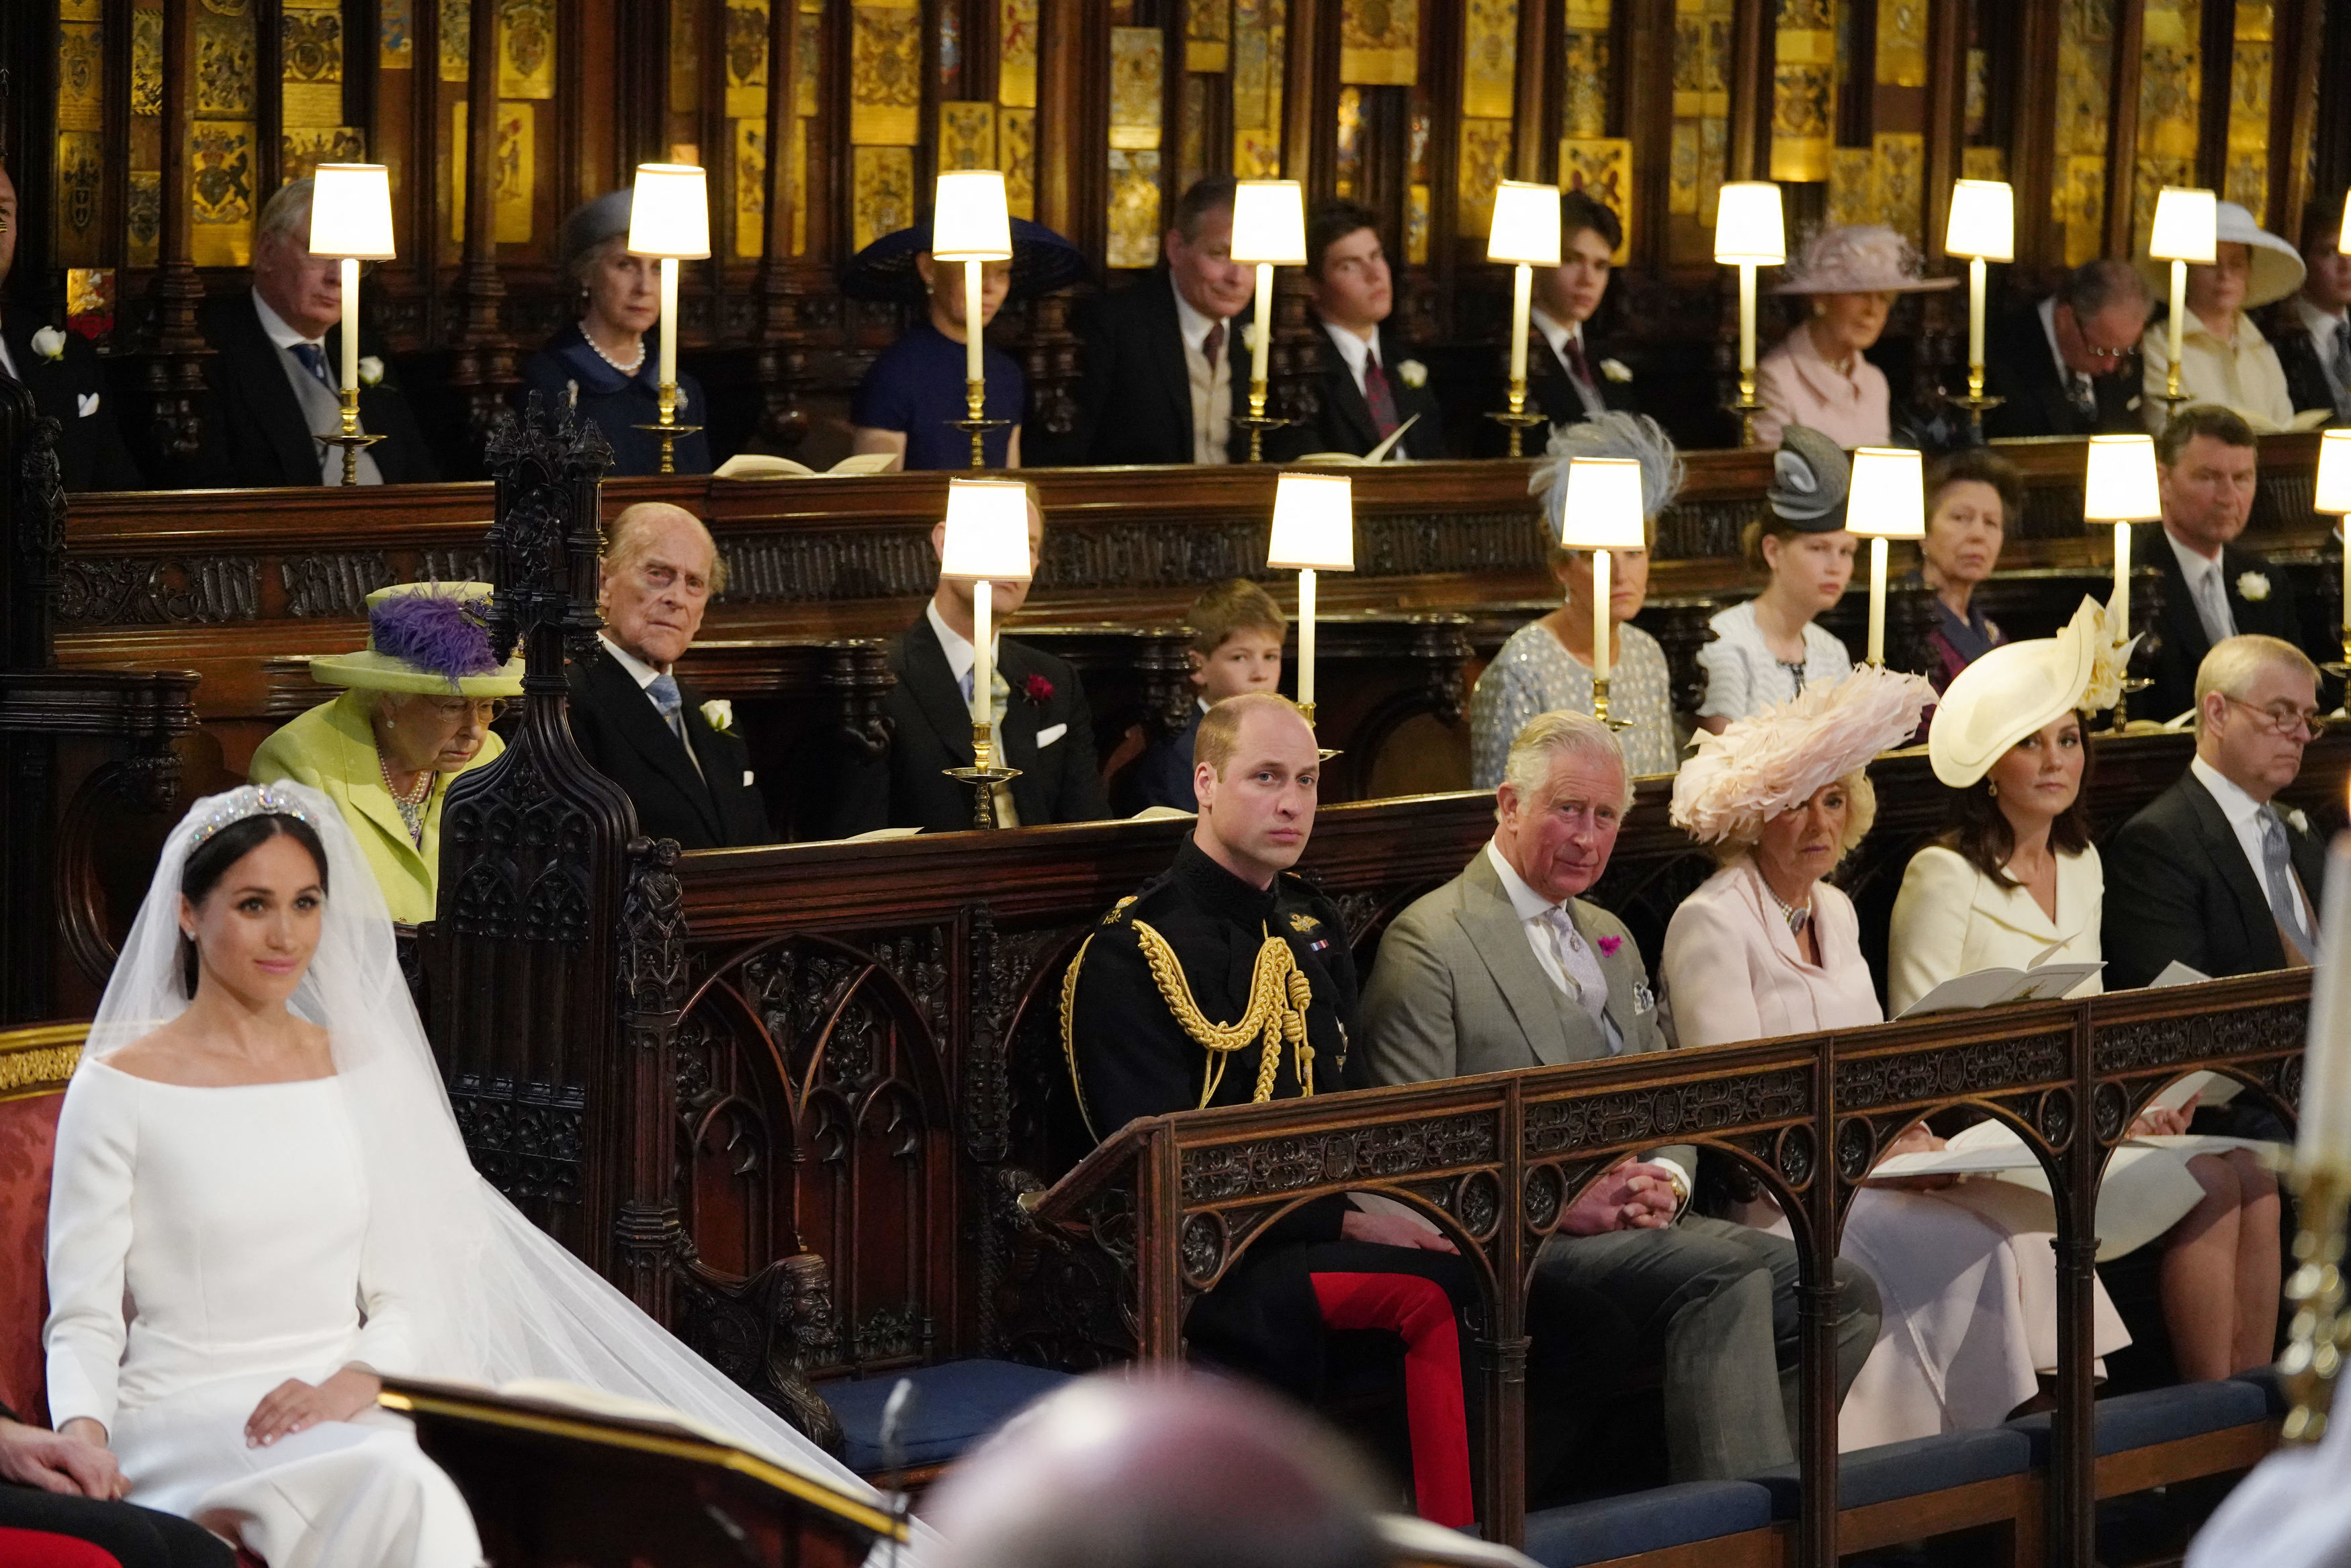 <p>Queen Elizabeth II and other members of the royal family looked on as grandson <a href="https://www.wonderwall.com/celebrity/profiles/overview/prince-harry-481.article">Prince Harry</a> married Meghan Markle in St. George's Chapel at Windsor Castle in Windsor, England, on May 19, 2018.</p>